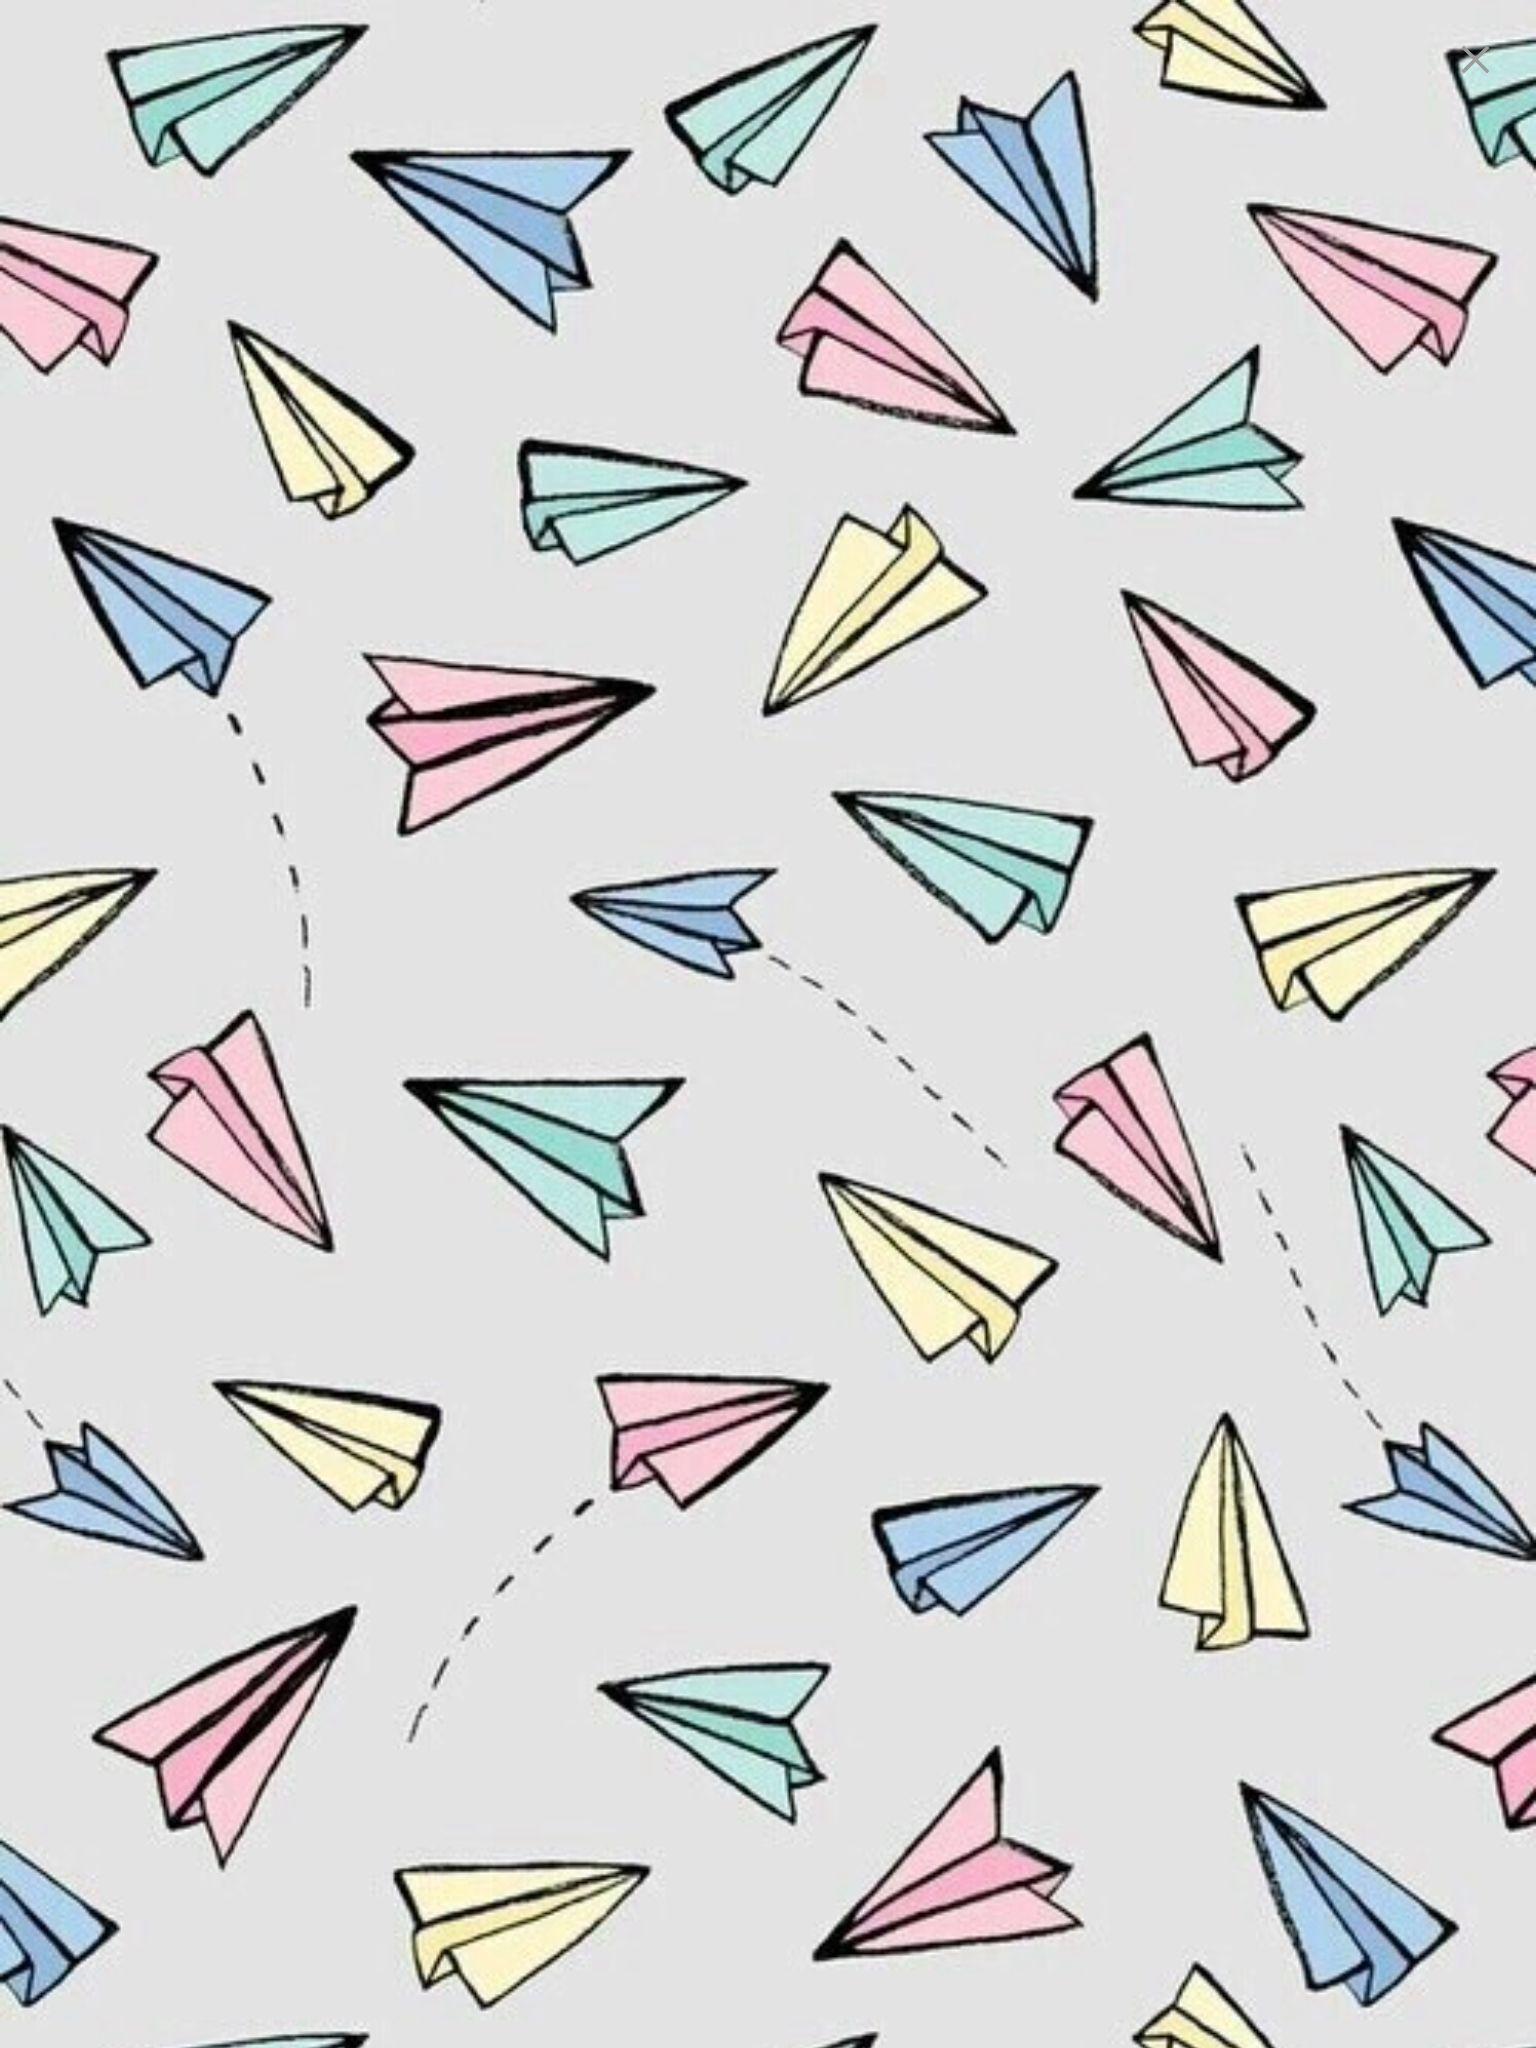 Paper planes. Pattern wallpaper, Airplane wallpaper, iPhone background